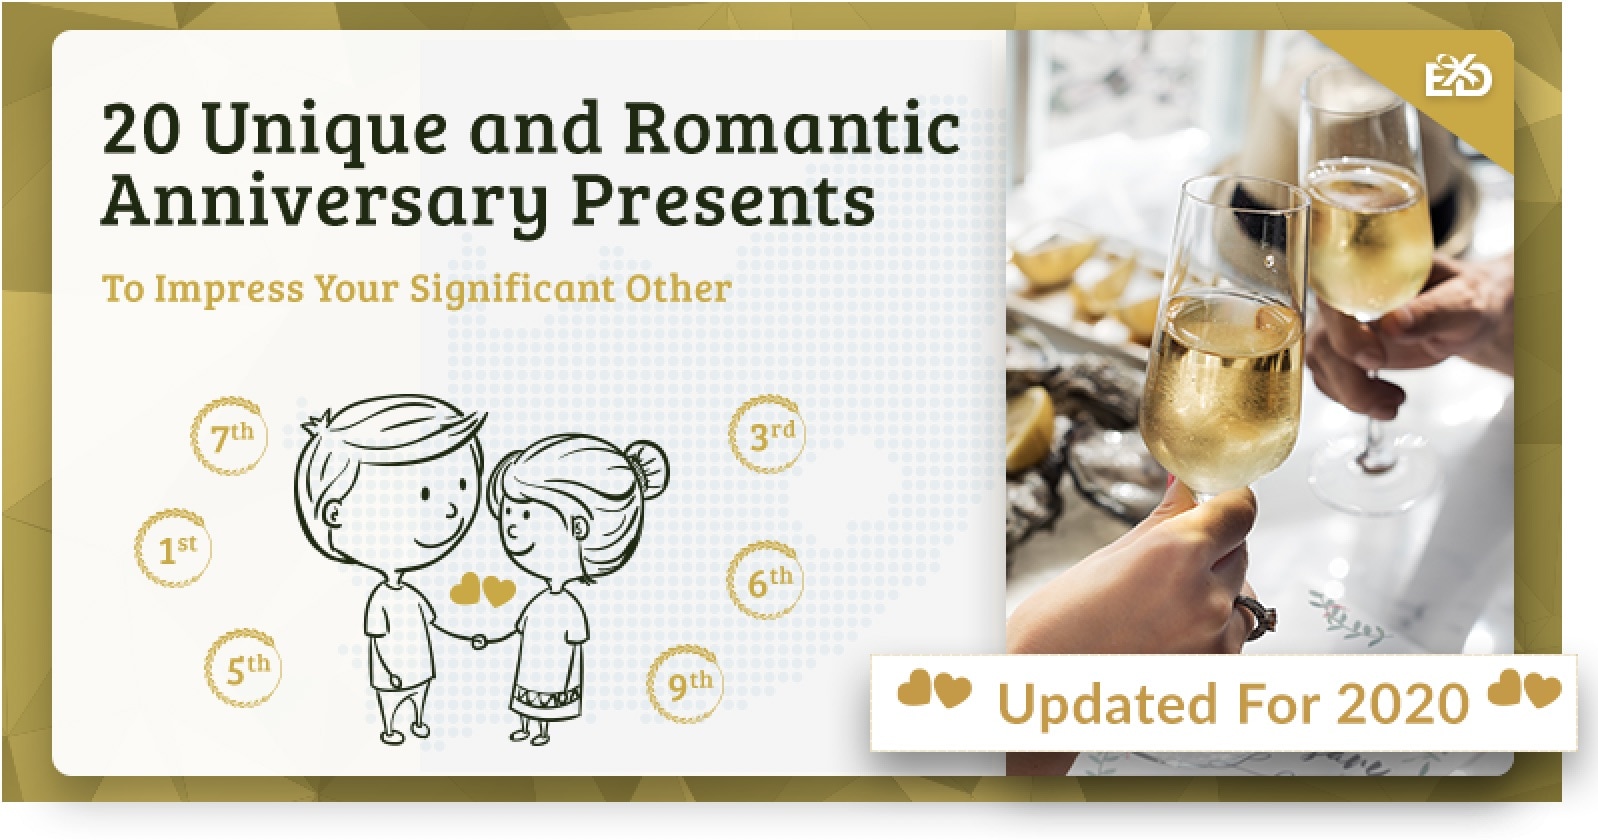 20 Unique and Romantic Anniversary Presents to Impress Your Significant Other